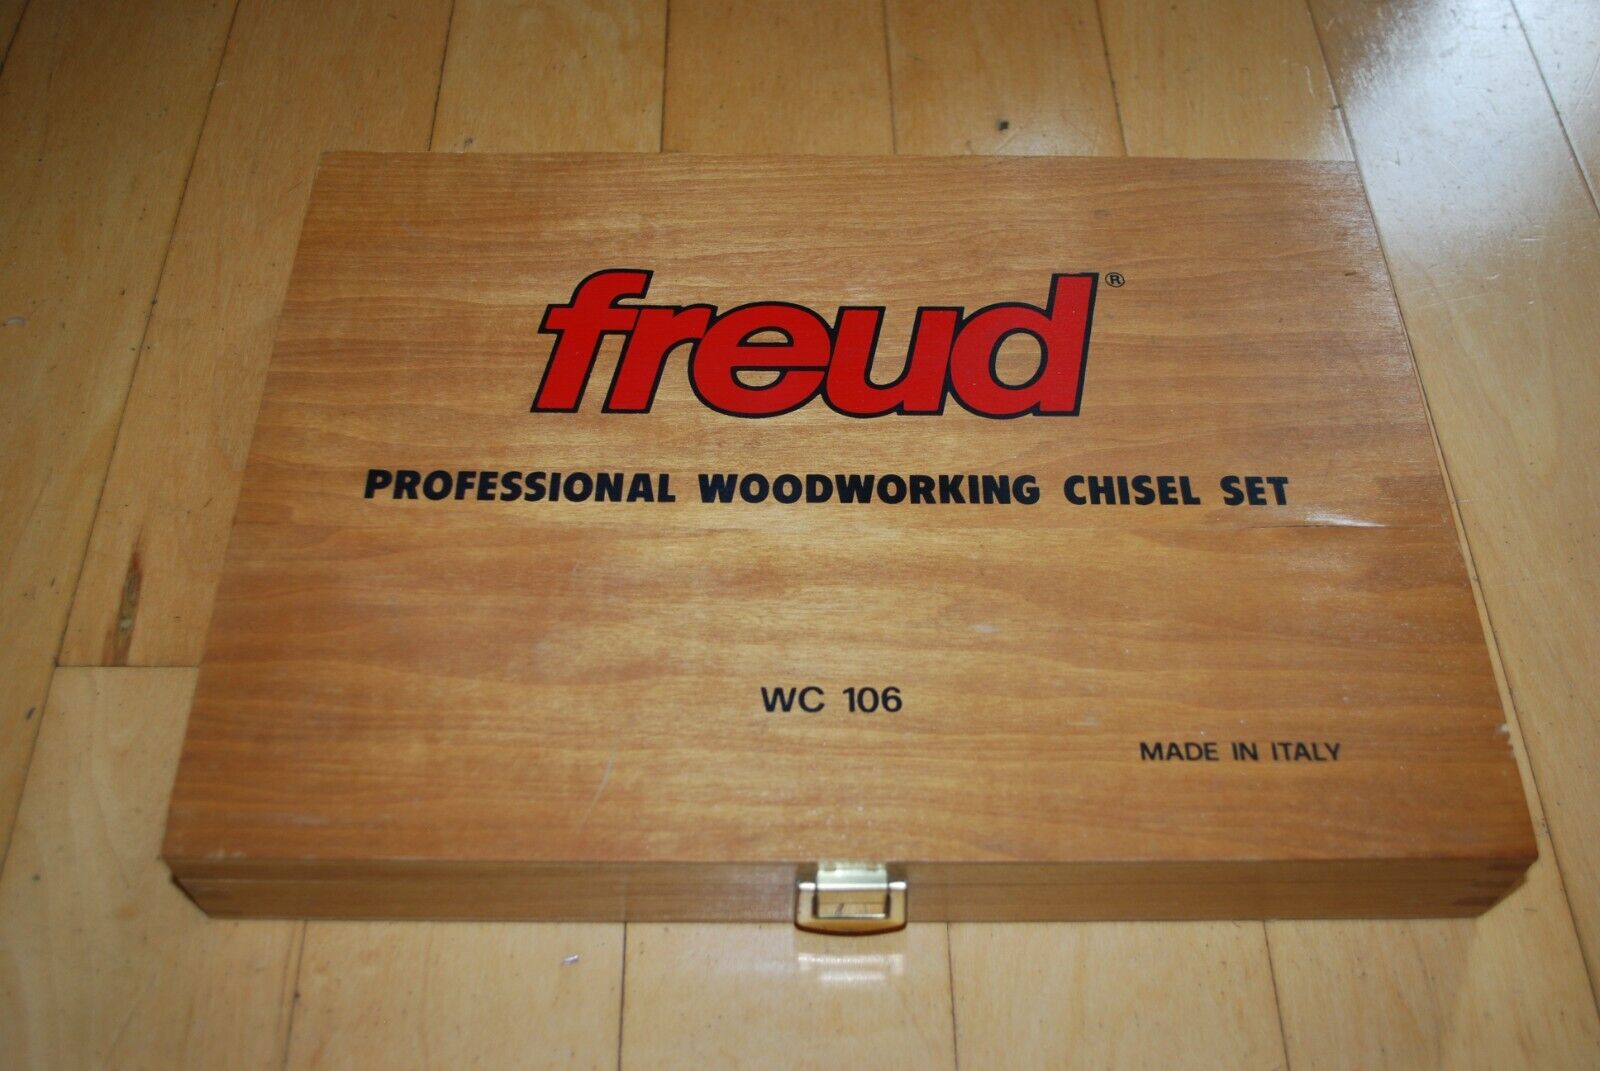 Freud Professional Woodworking Chisel Set WC106 Made in Italy